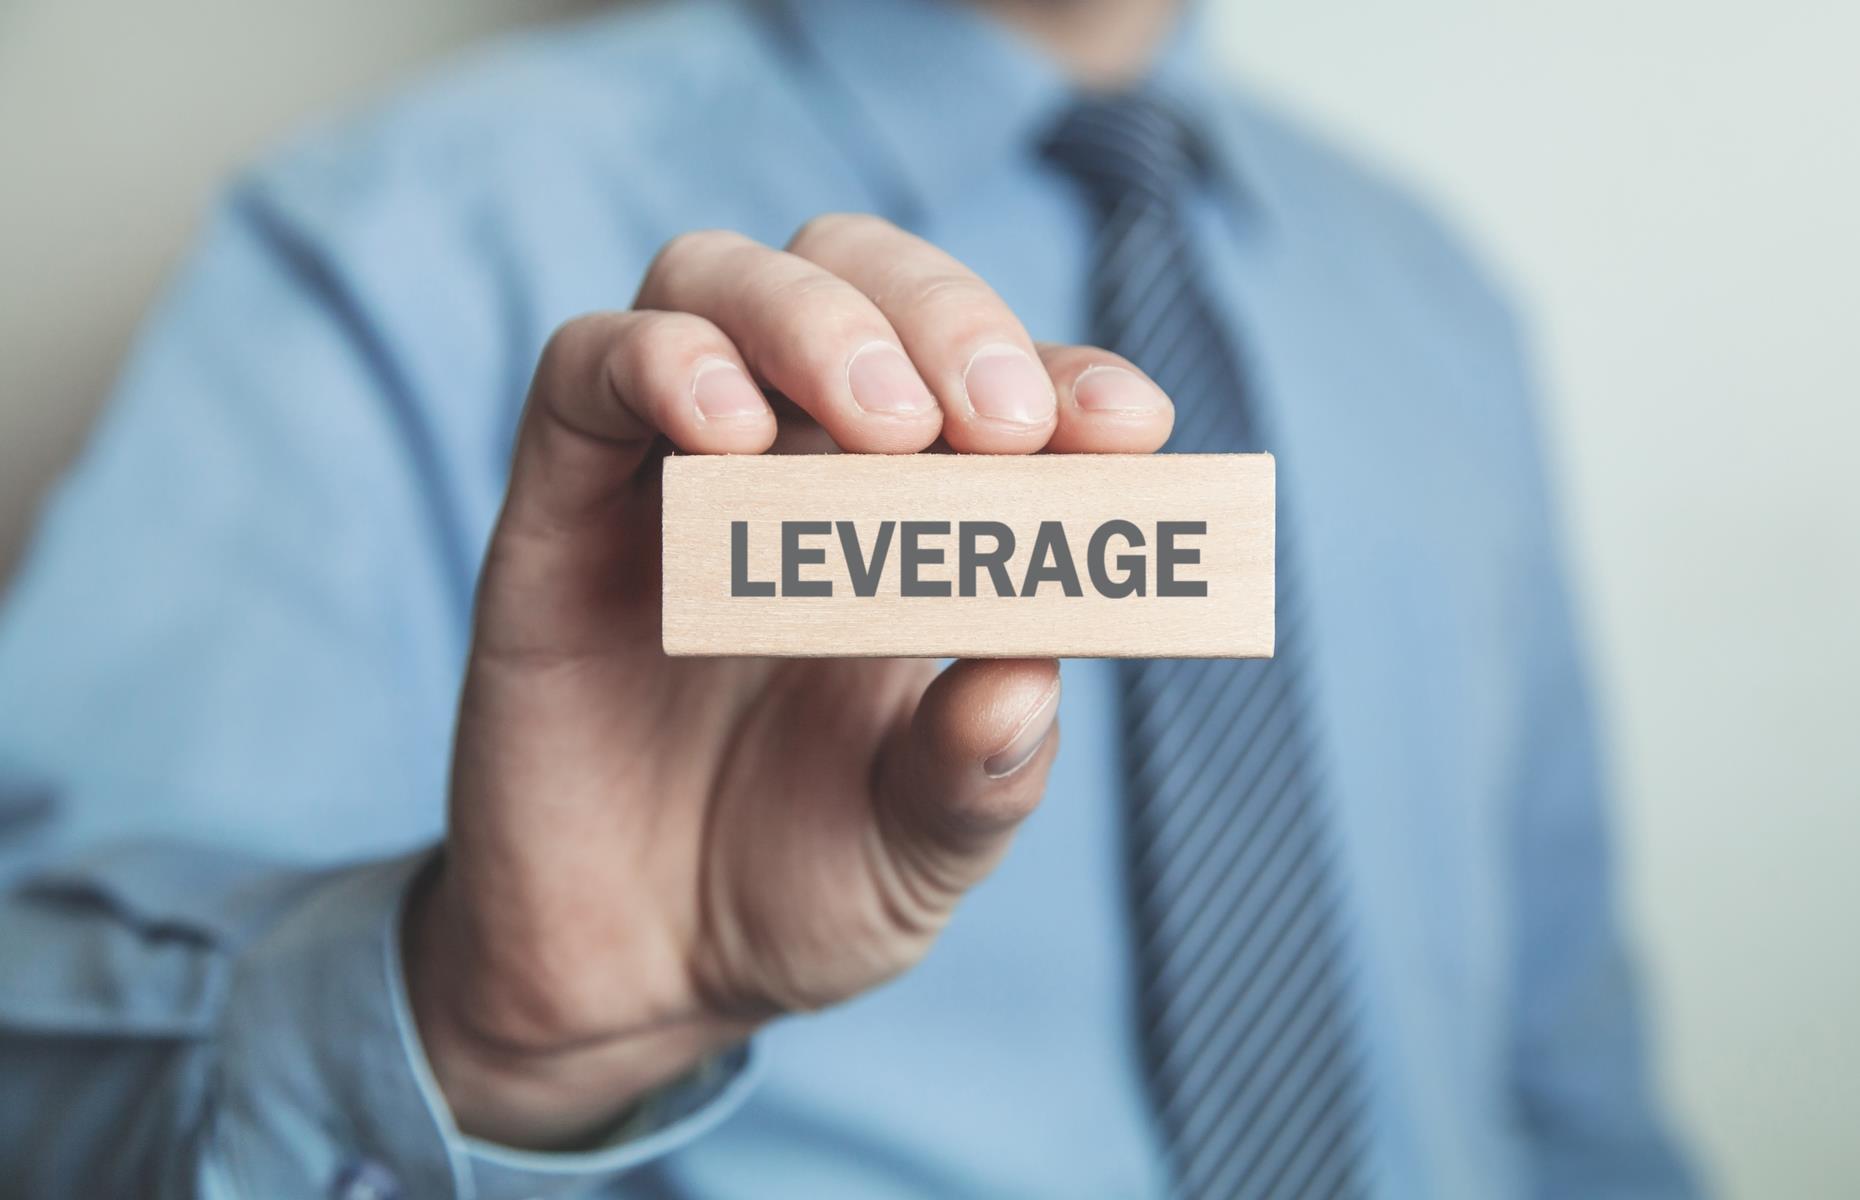 <p>Ranked as the 11th most annoying word by TrustRadius survey respondents, “leverage” is so annoying because it’s usually used when a shorter, simpler word would suffice. </p>